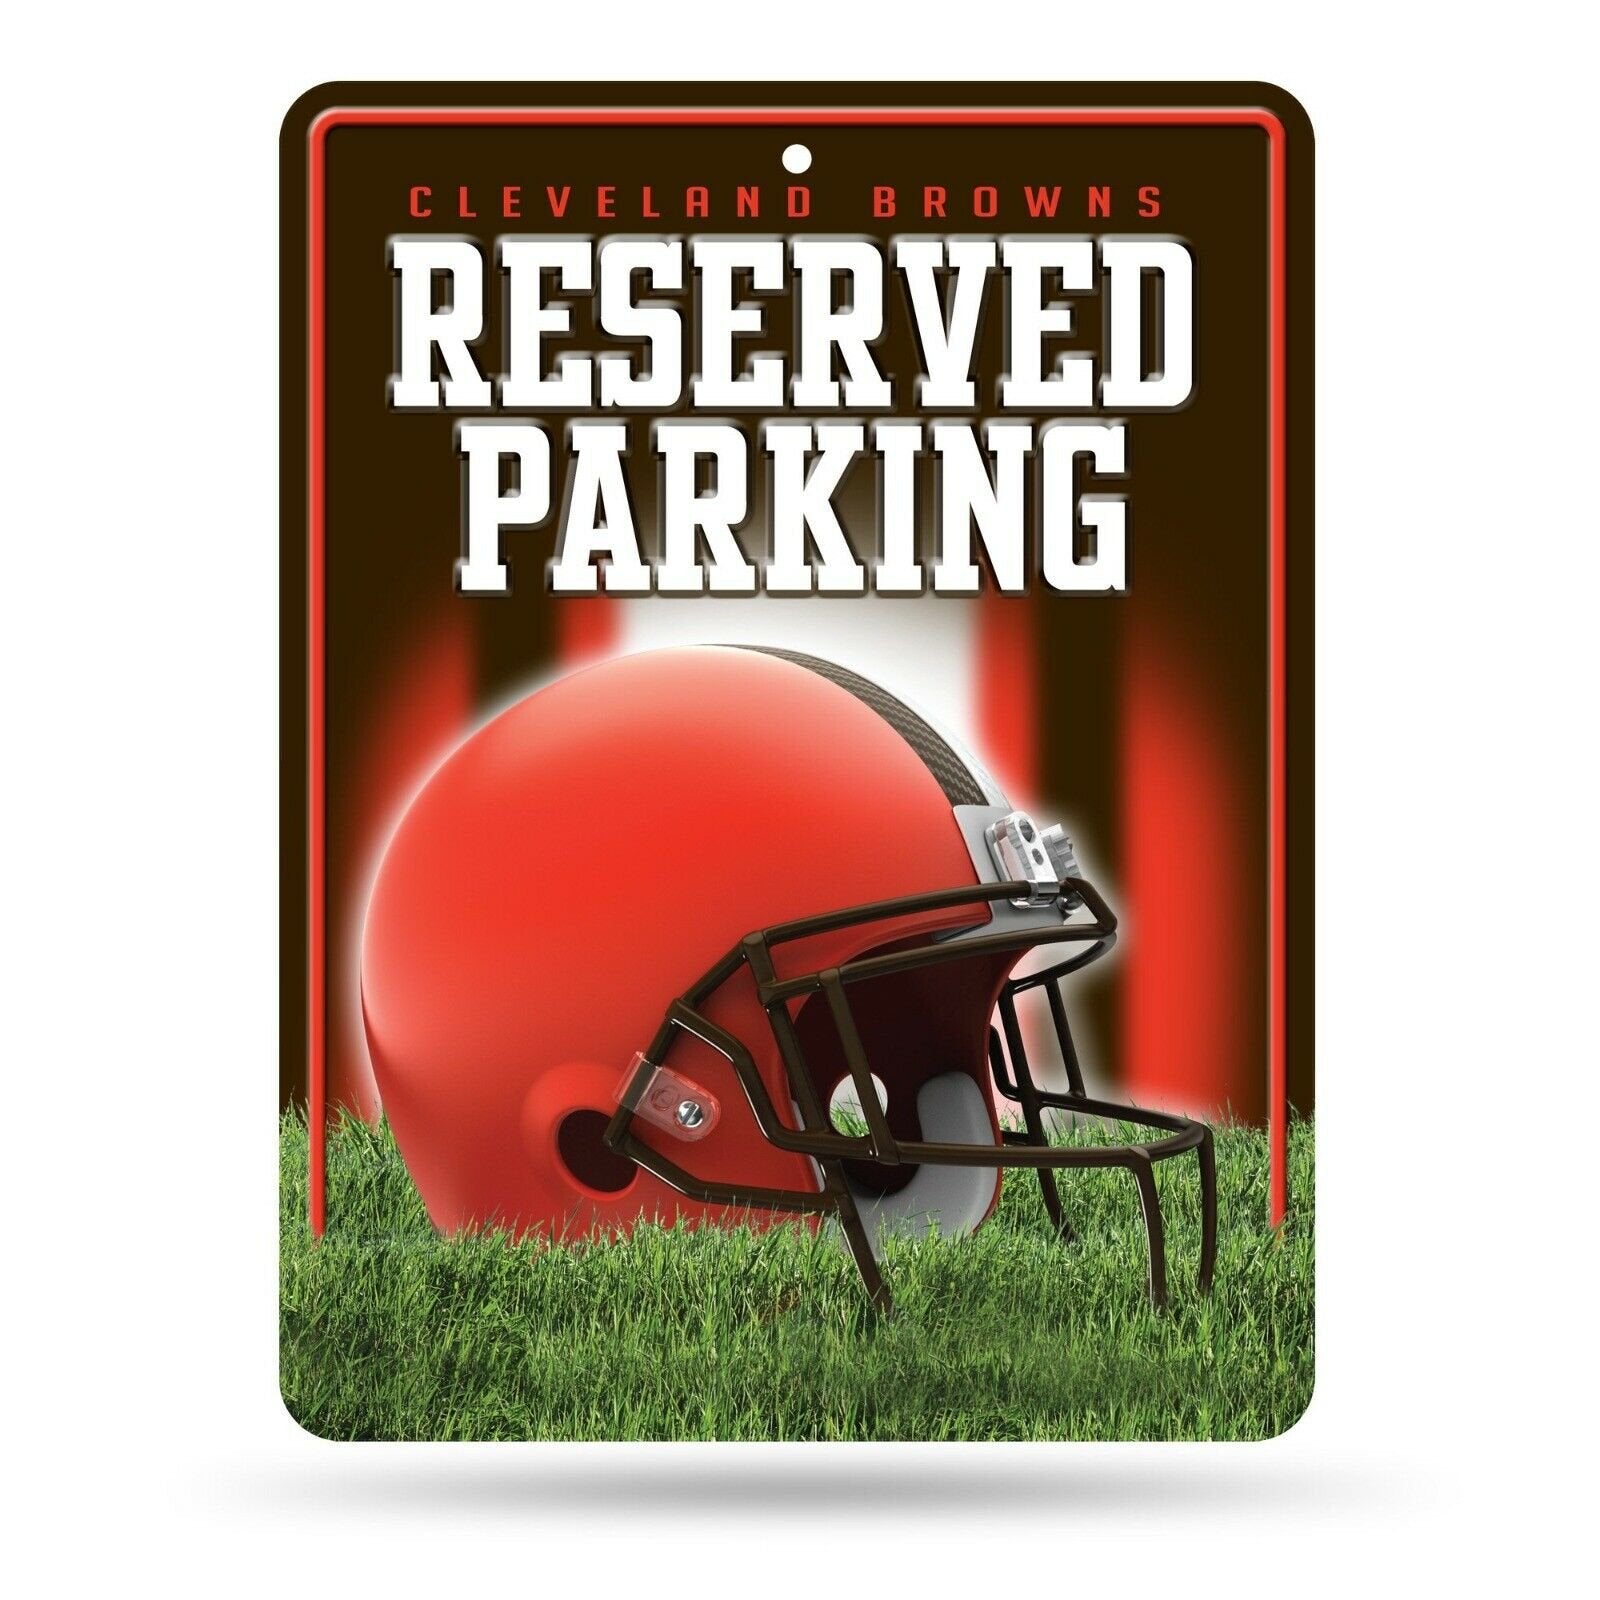 Cleveland Browns 8x11 Metal Parking Sign Embossed Wall Football